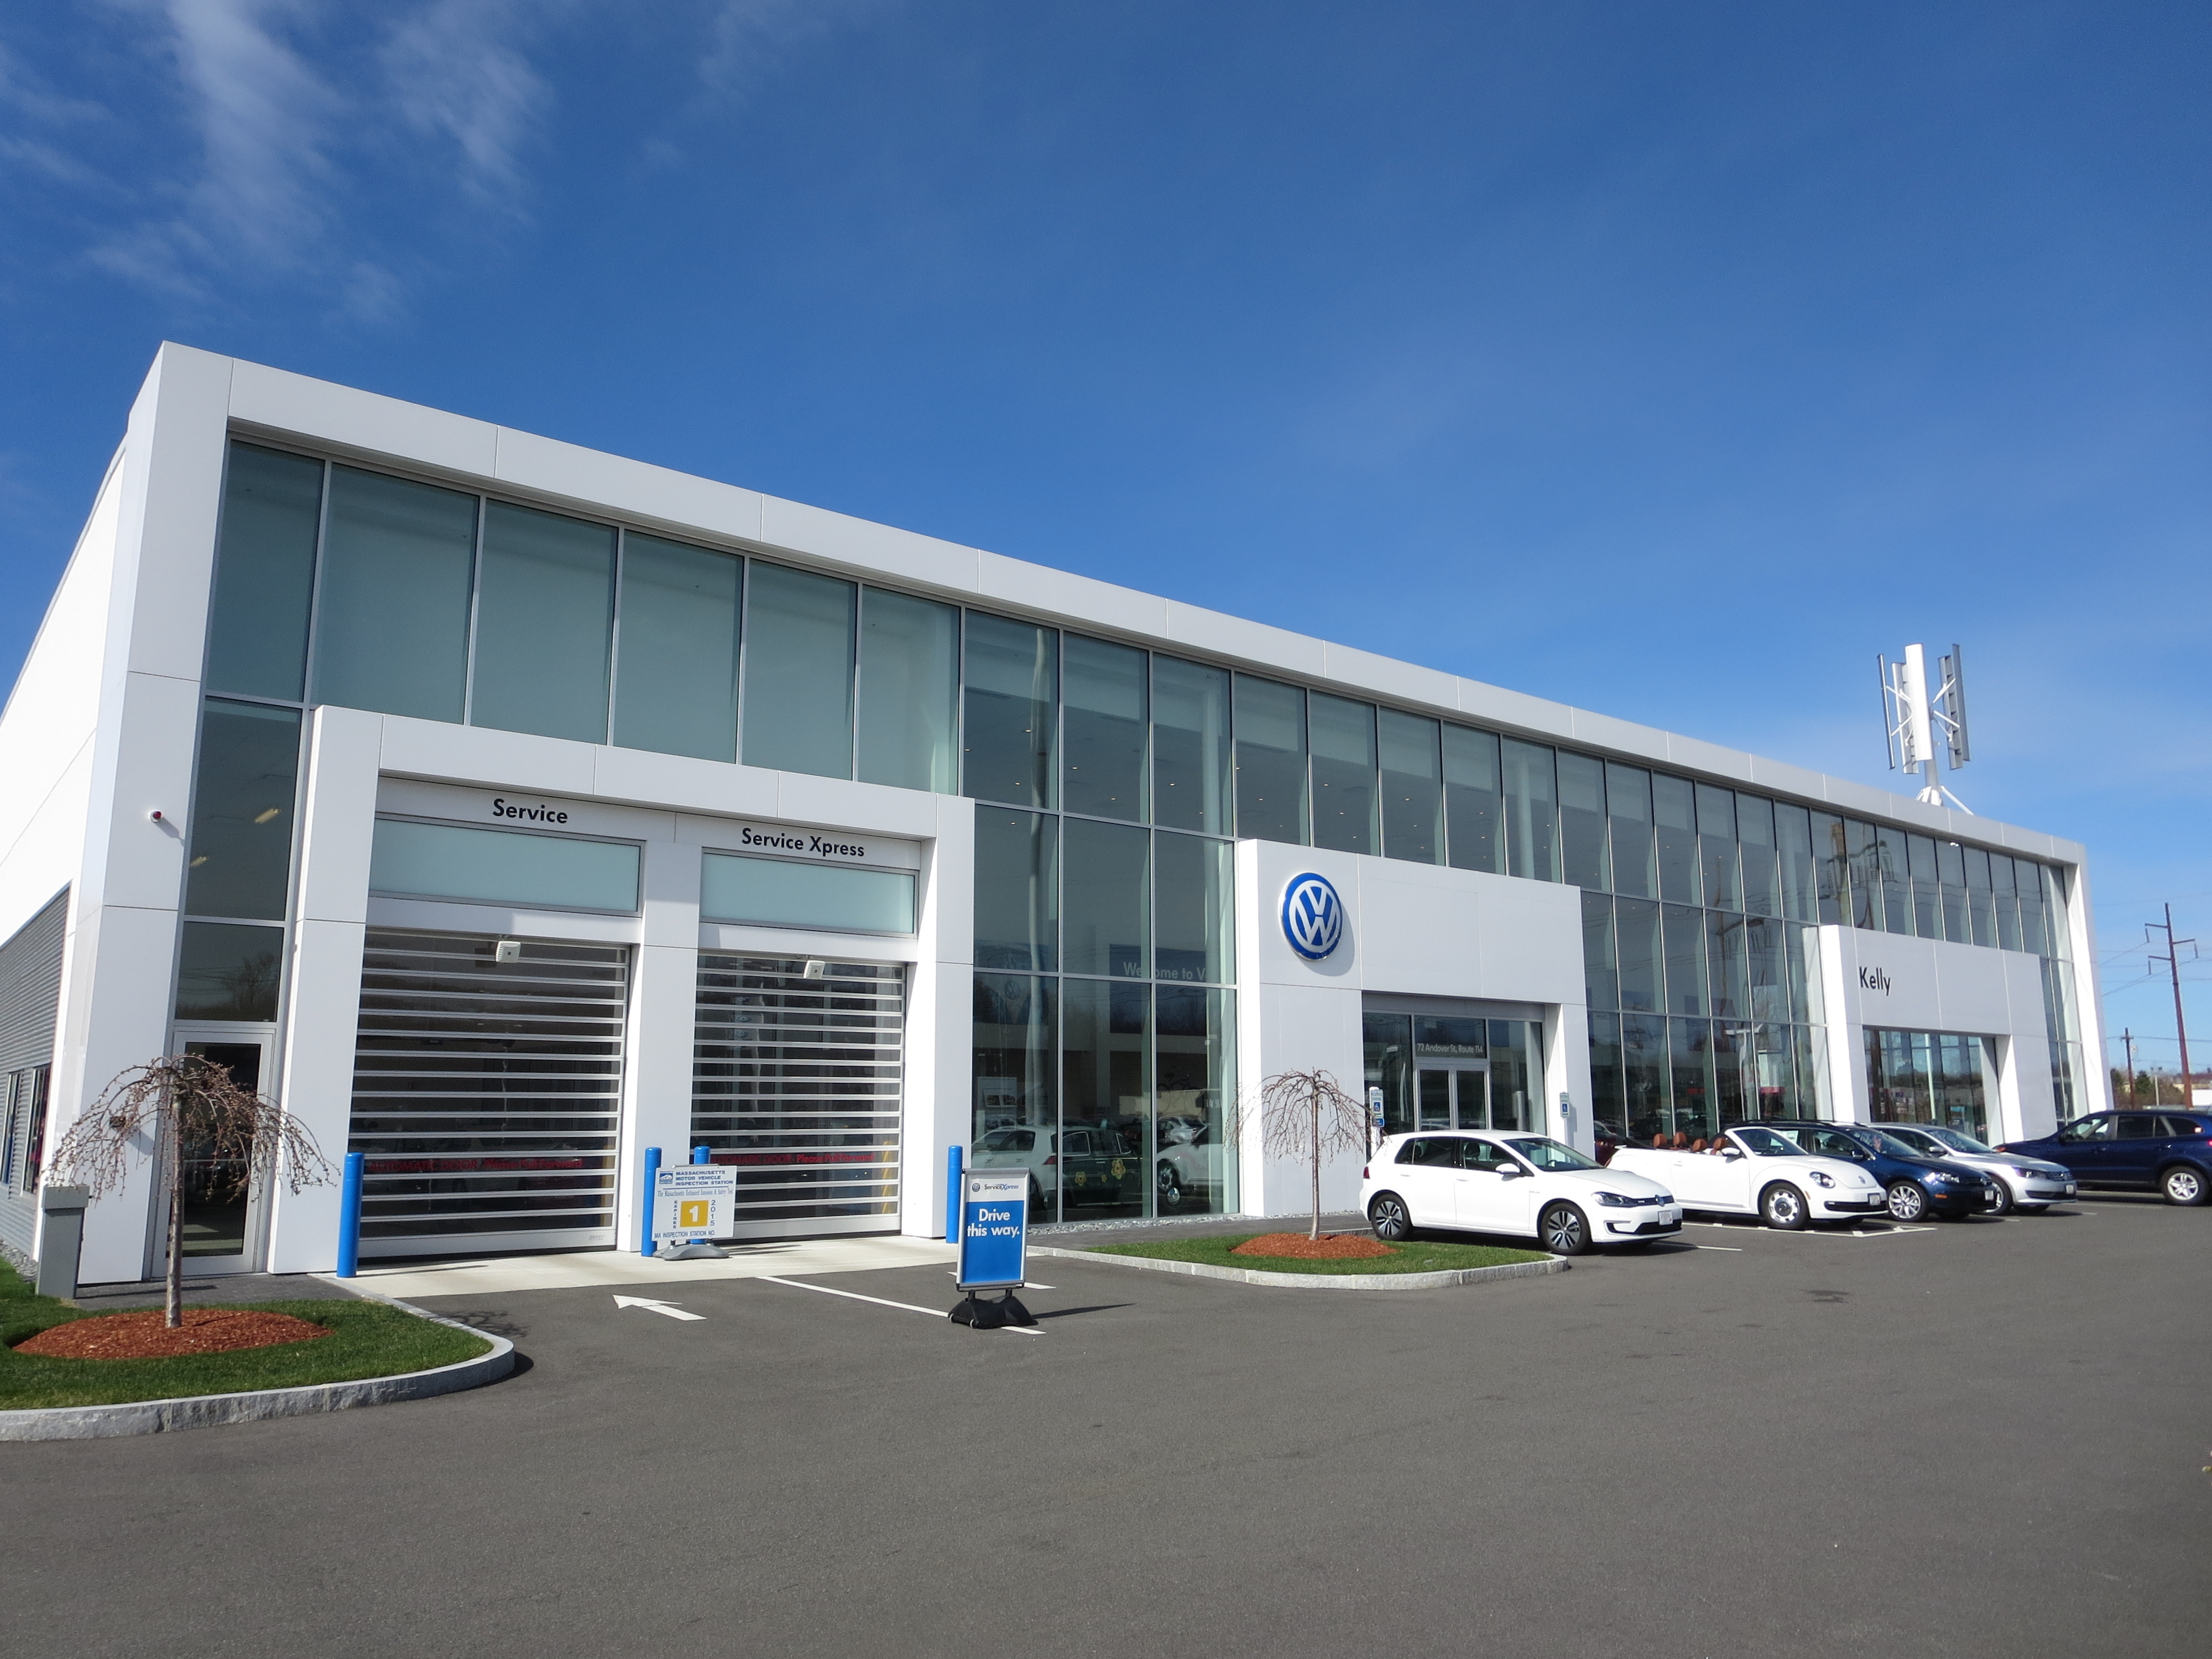 Our Service Drive and Express Service drive was created with the convenience of our customers in mind. Drive right in and let one of our Volkswagen service advisors help you with your VW service needs immediately.